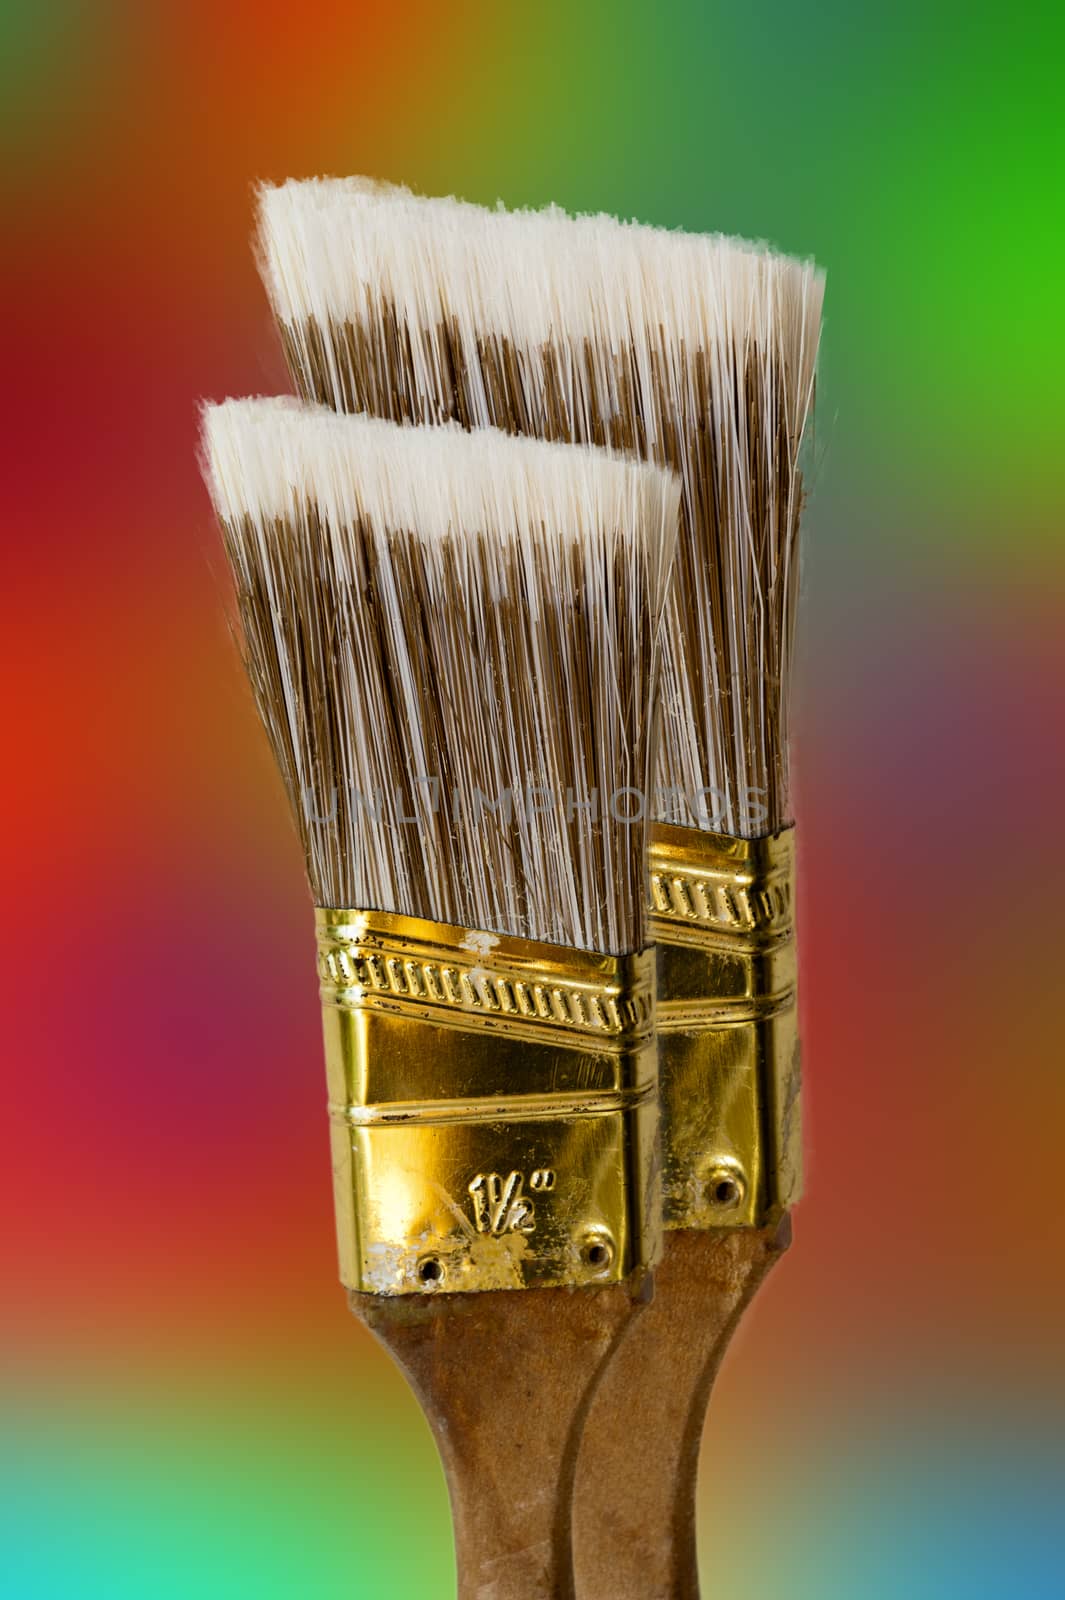 Two brushes against colored background by ben44